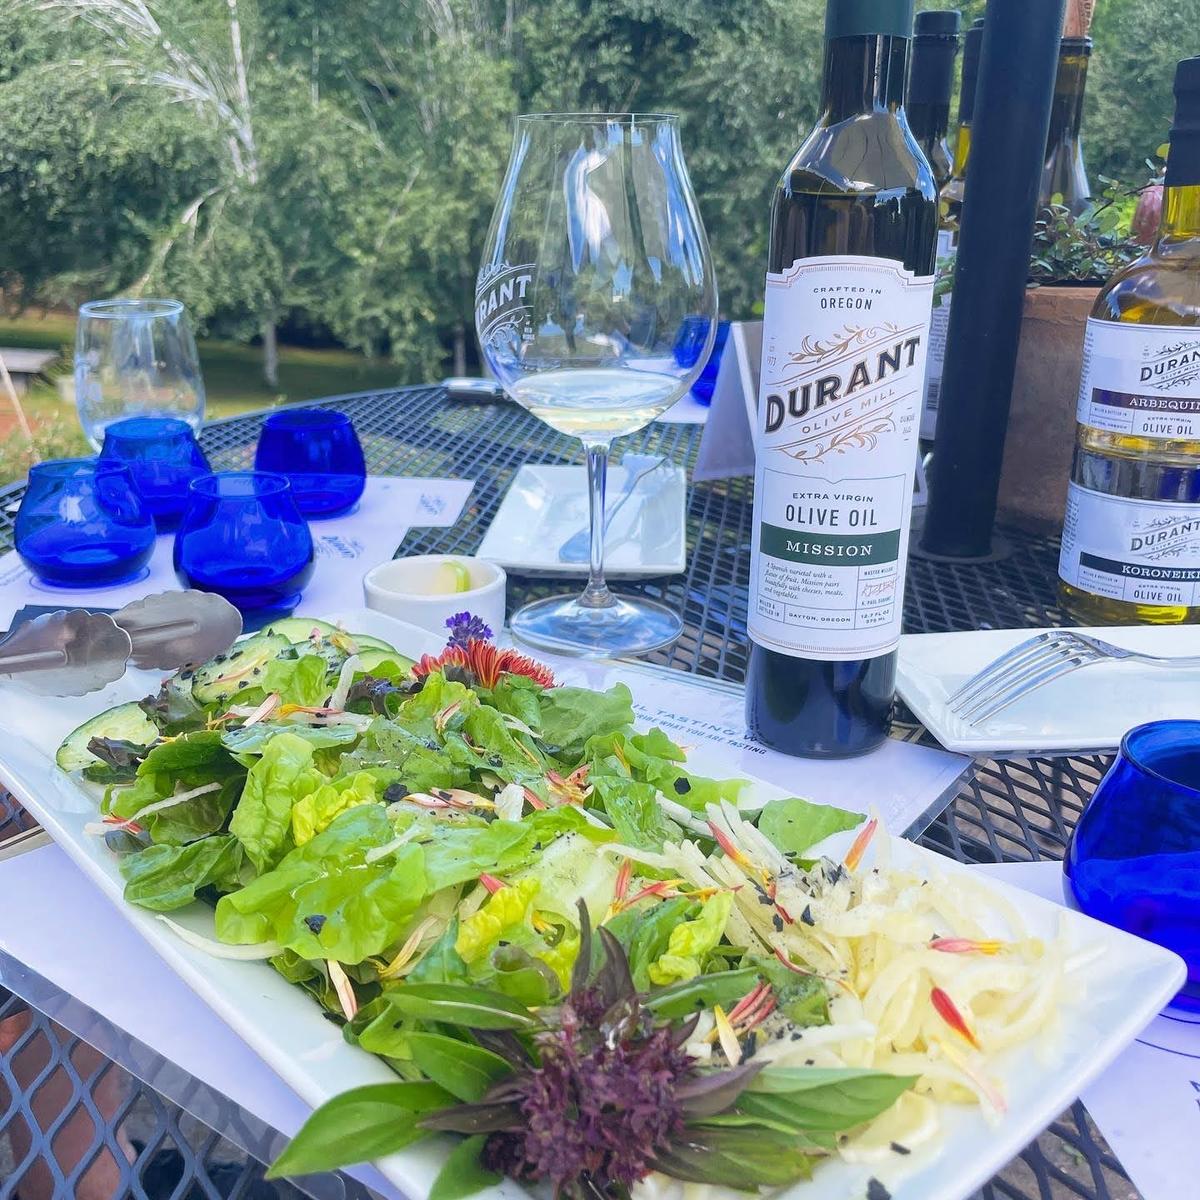 Salads dressed with olive oil grown onsite and served at the family-run Durant Estate in Oregon’s Willamette Valley. (Janna Graber)